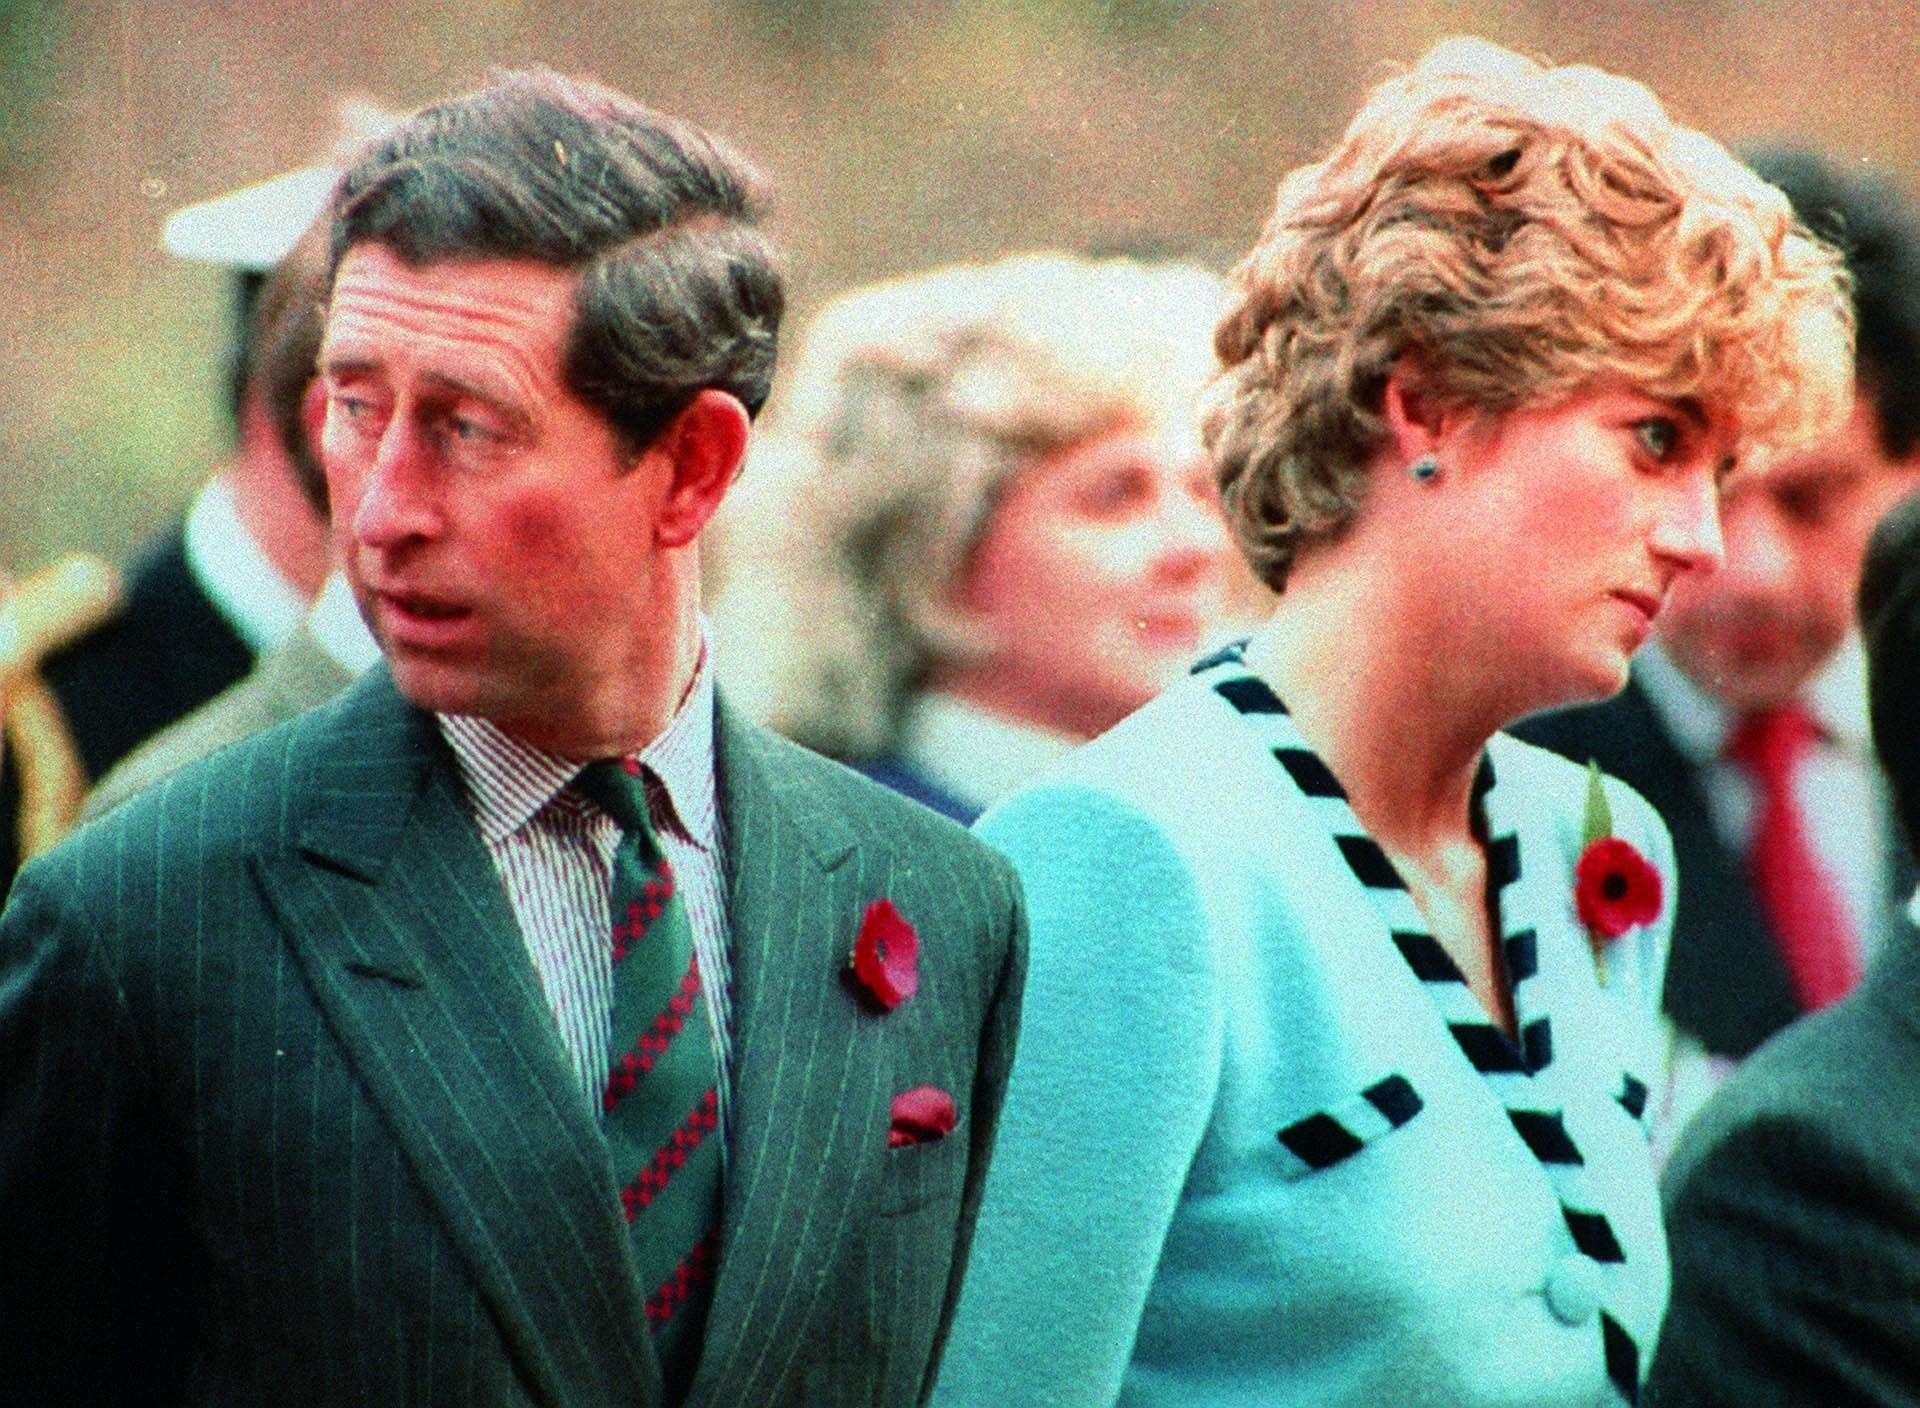 The then-Prince and Princess of Wales at a memorial outside Seoul, South Korea in 1992 (PA)